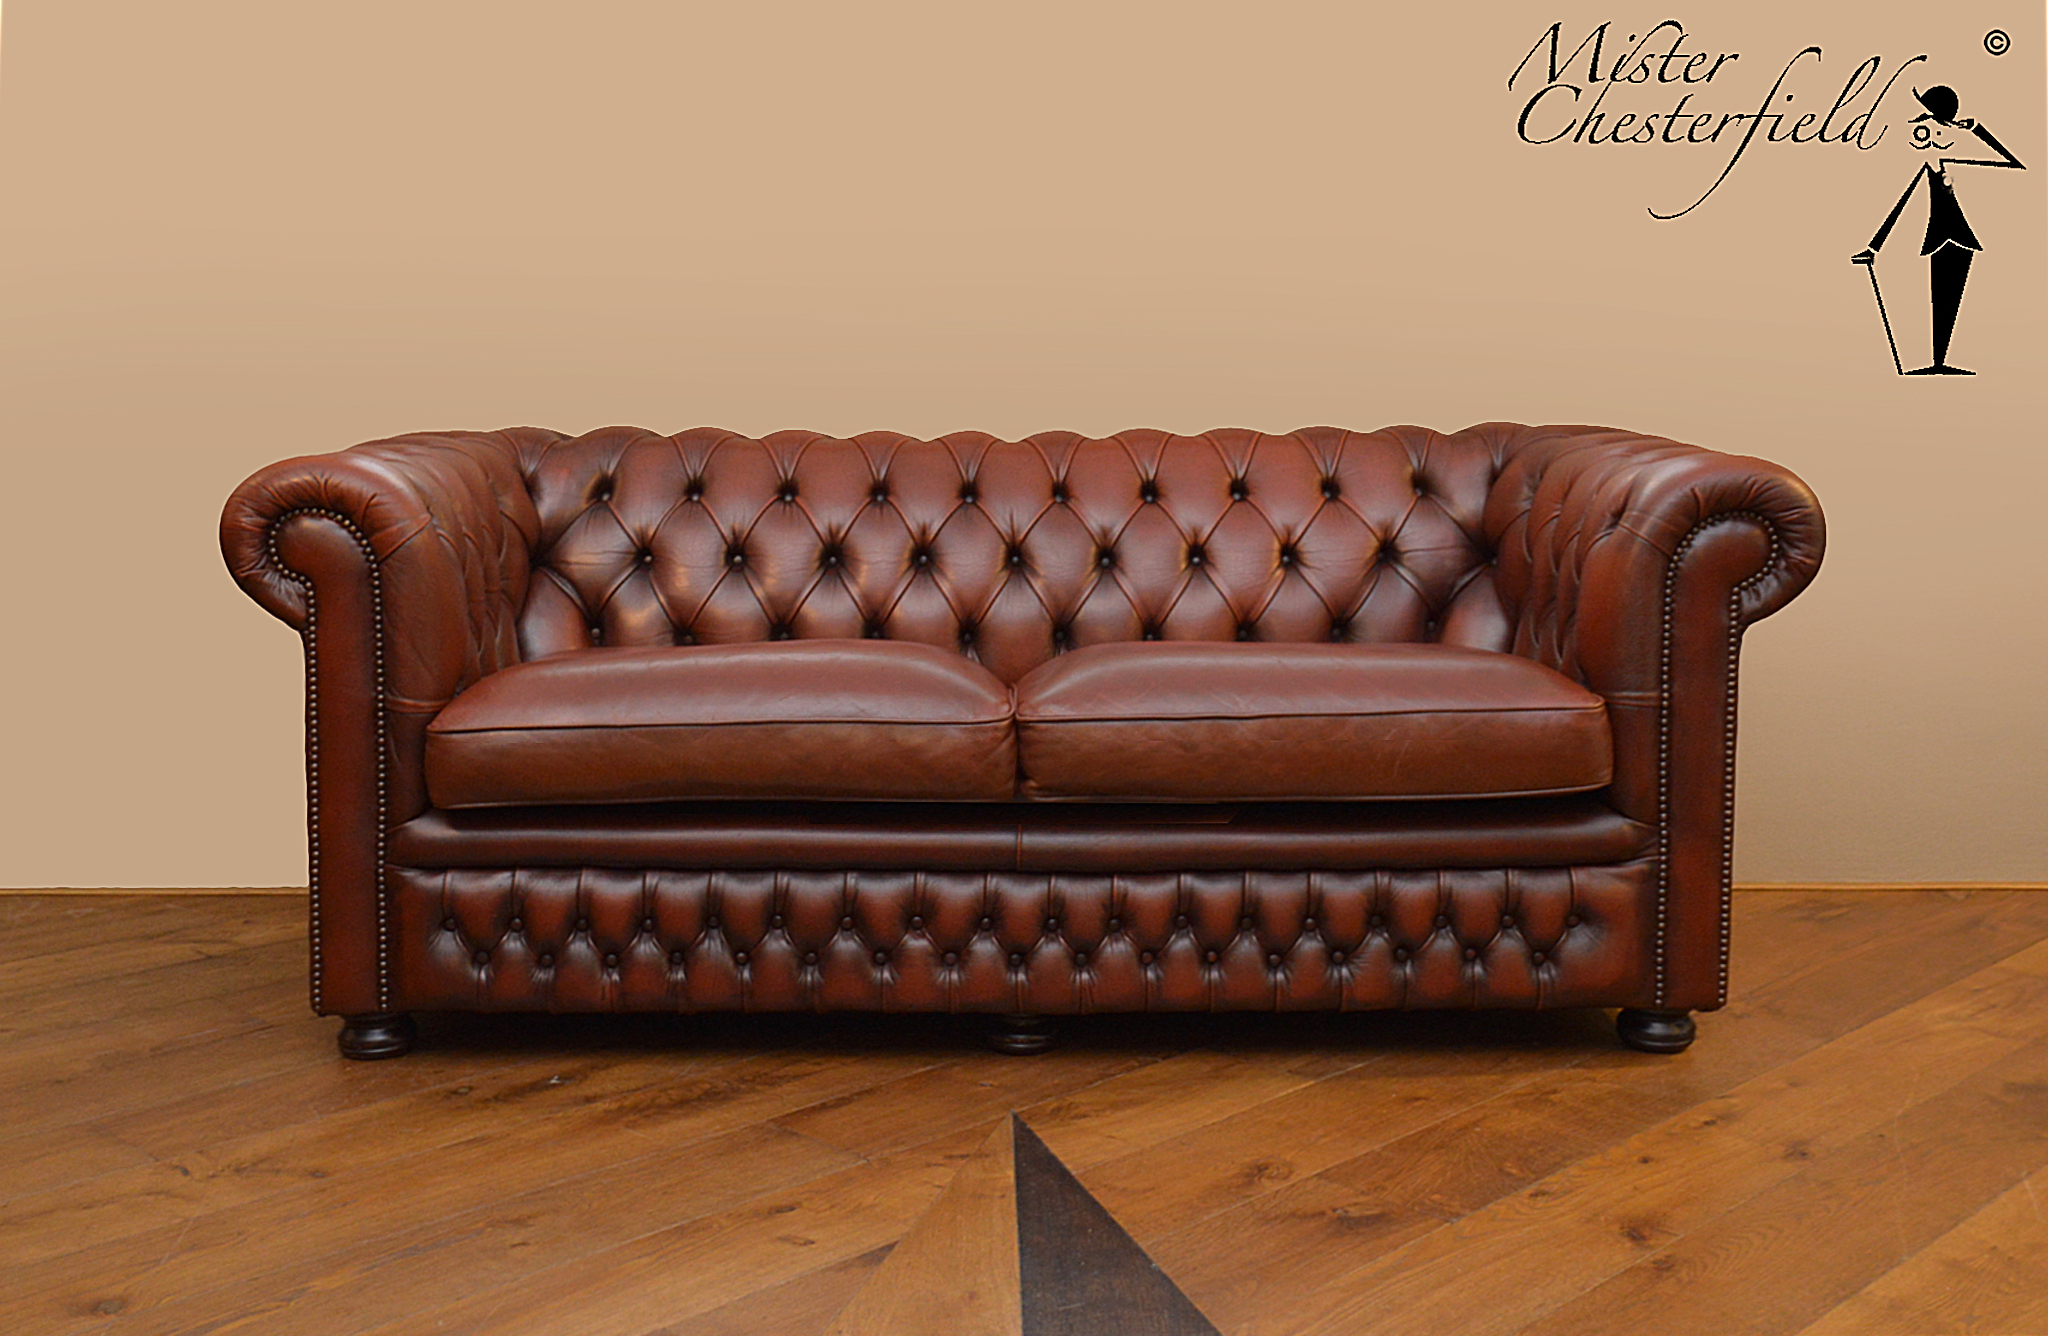 CHESTERFIELD-BANK-USED-NEW CONDITION